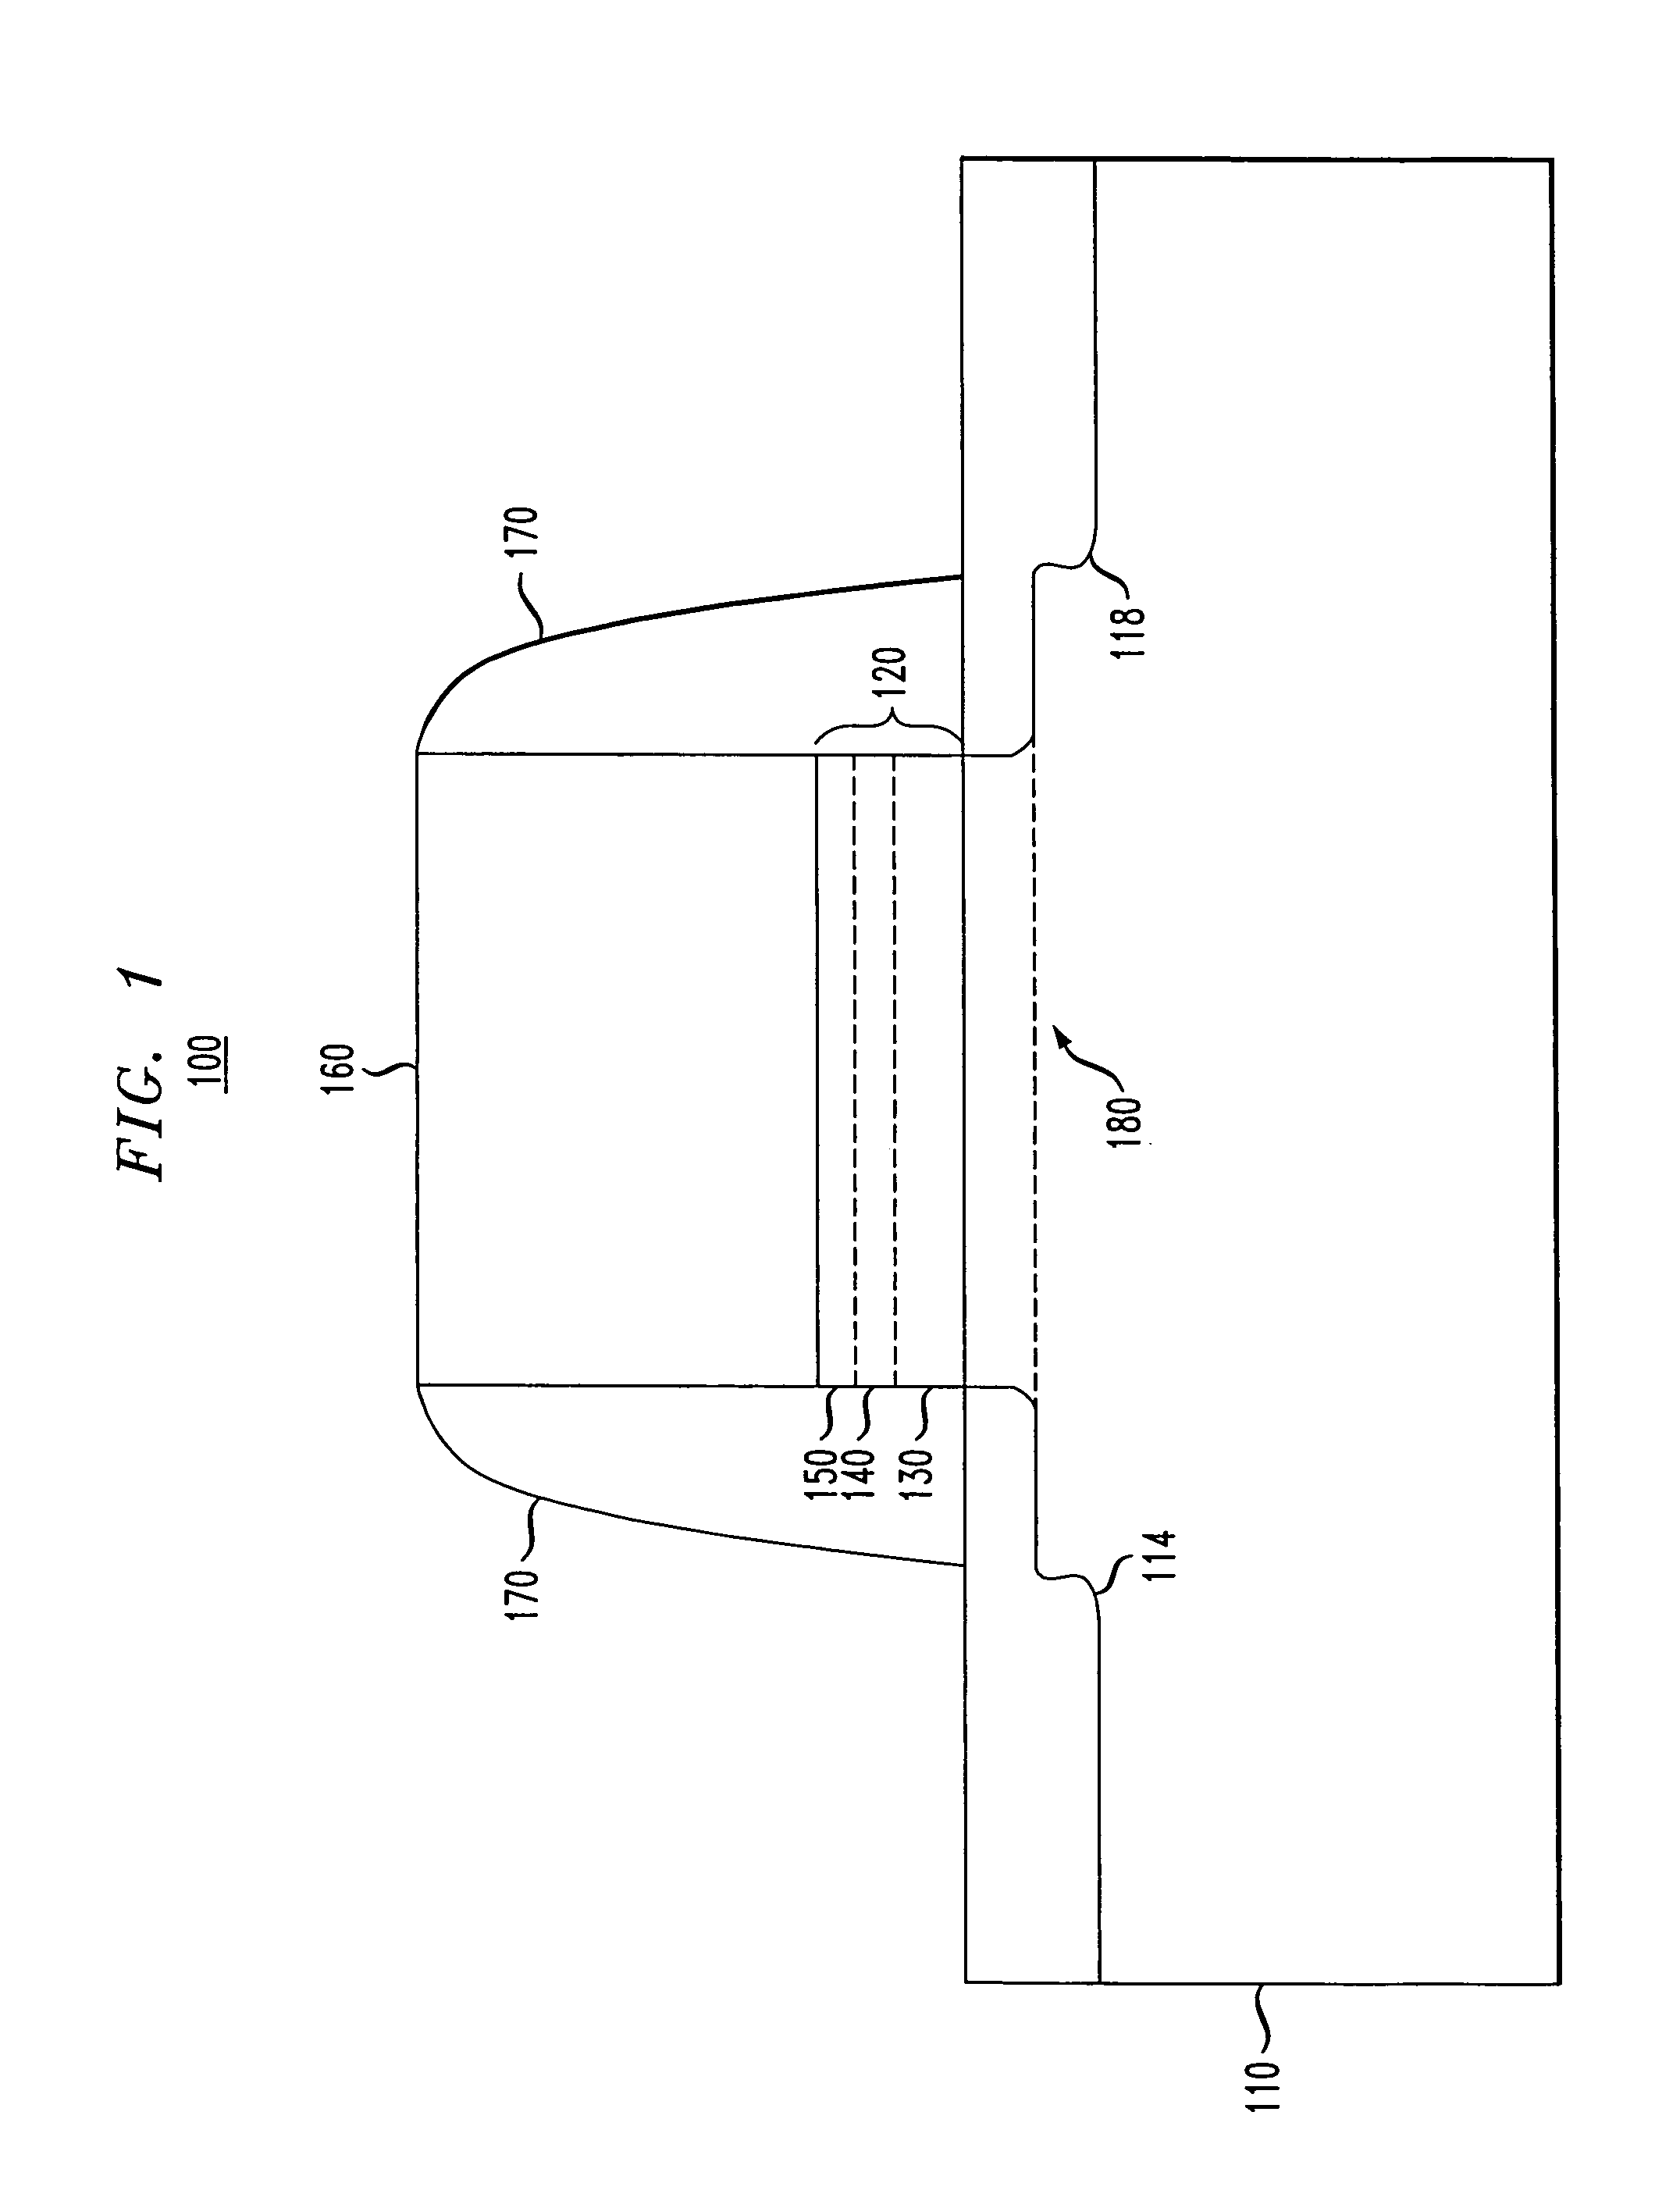 Gate dielectric structure for reducing boron penetration and current leakage